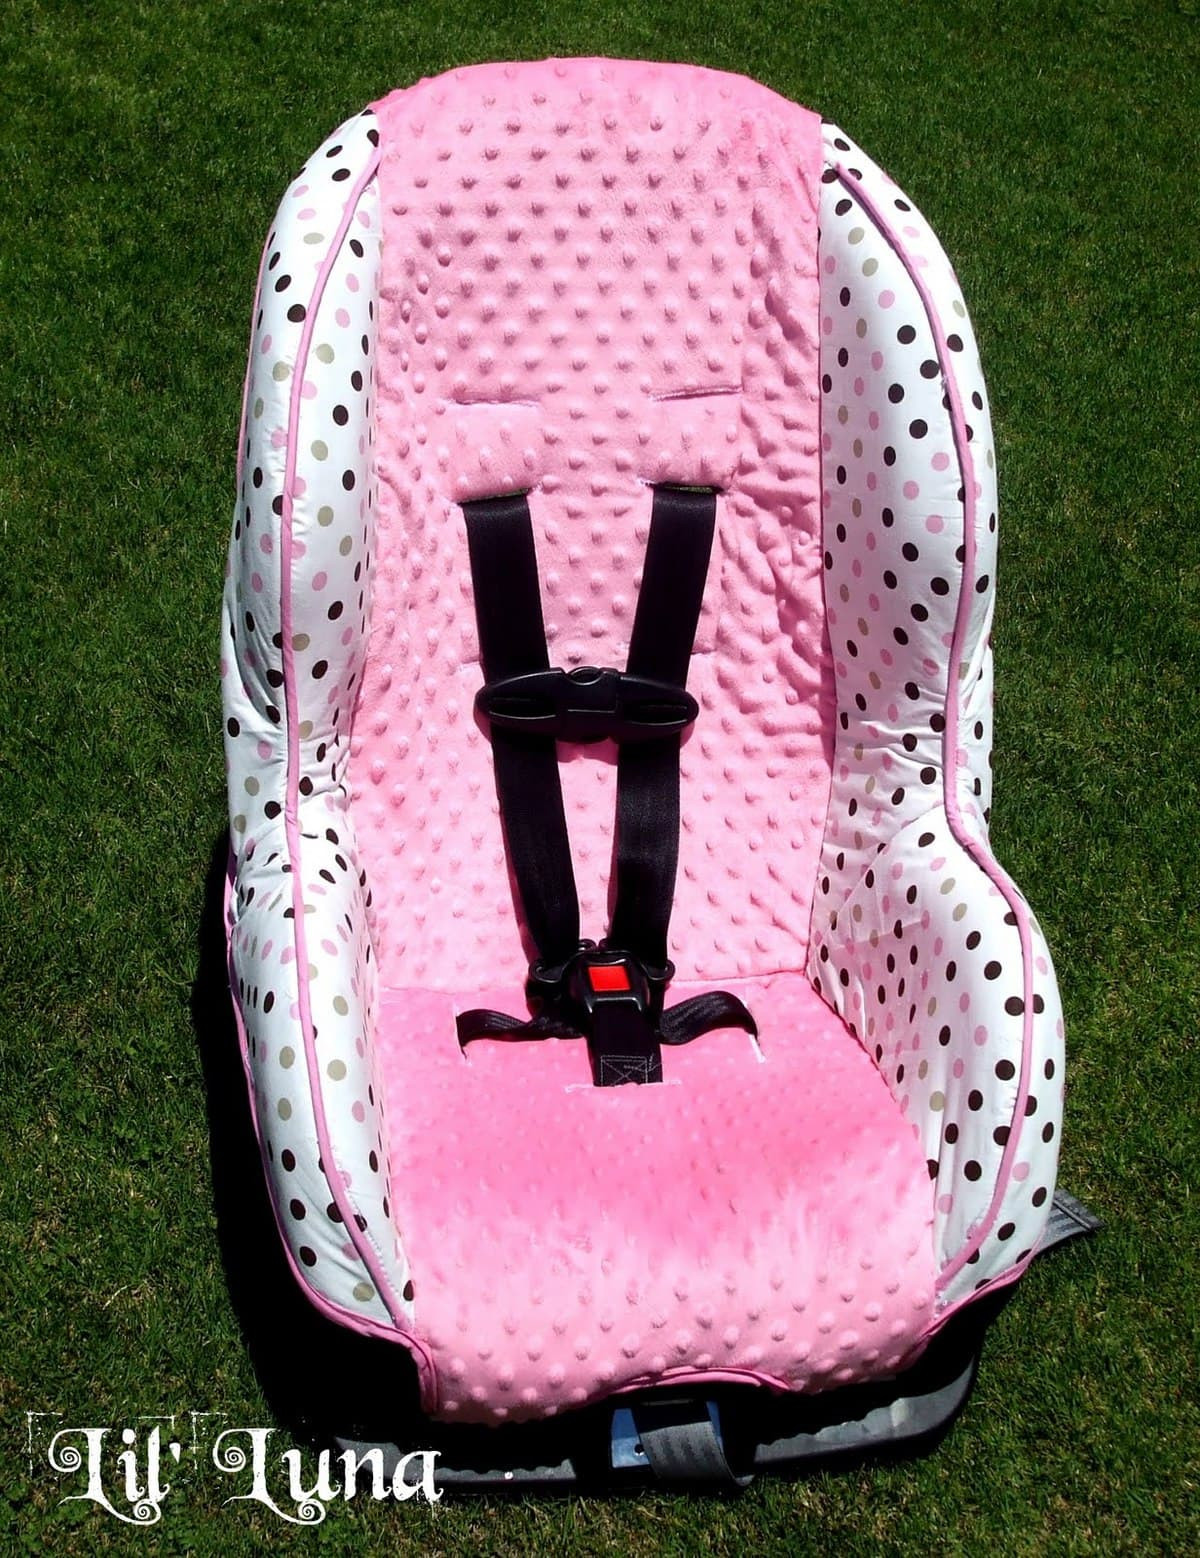 DIY Baby Car Seat Cover
 75 DIY Gifts For Kids